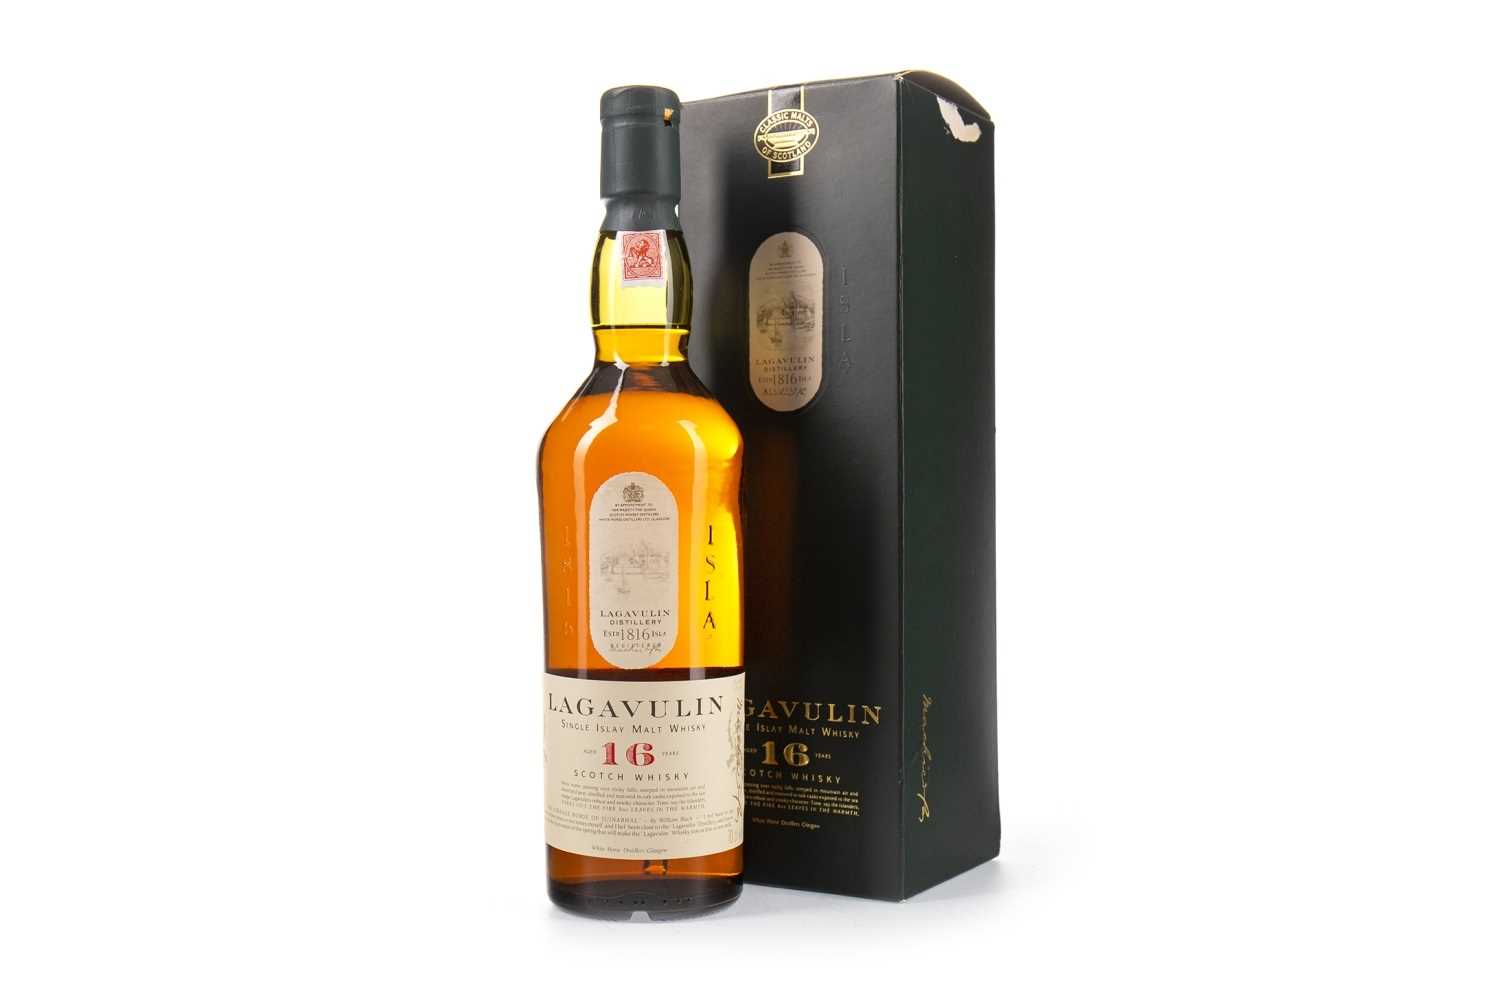 Lot 134 - LAGAVULIN AGED 16 YEARS WHITE HORSE